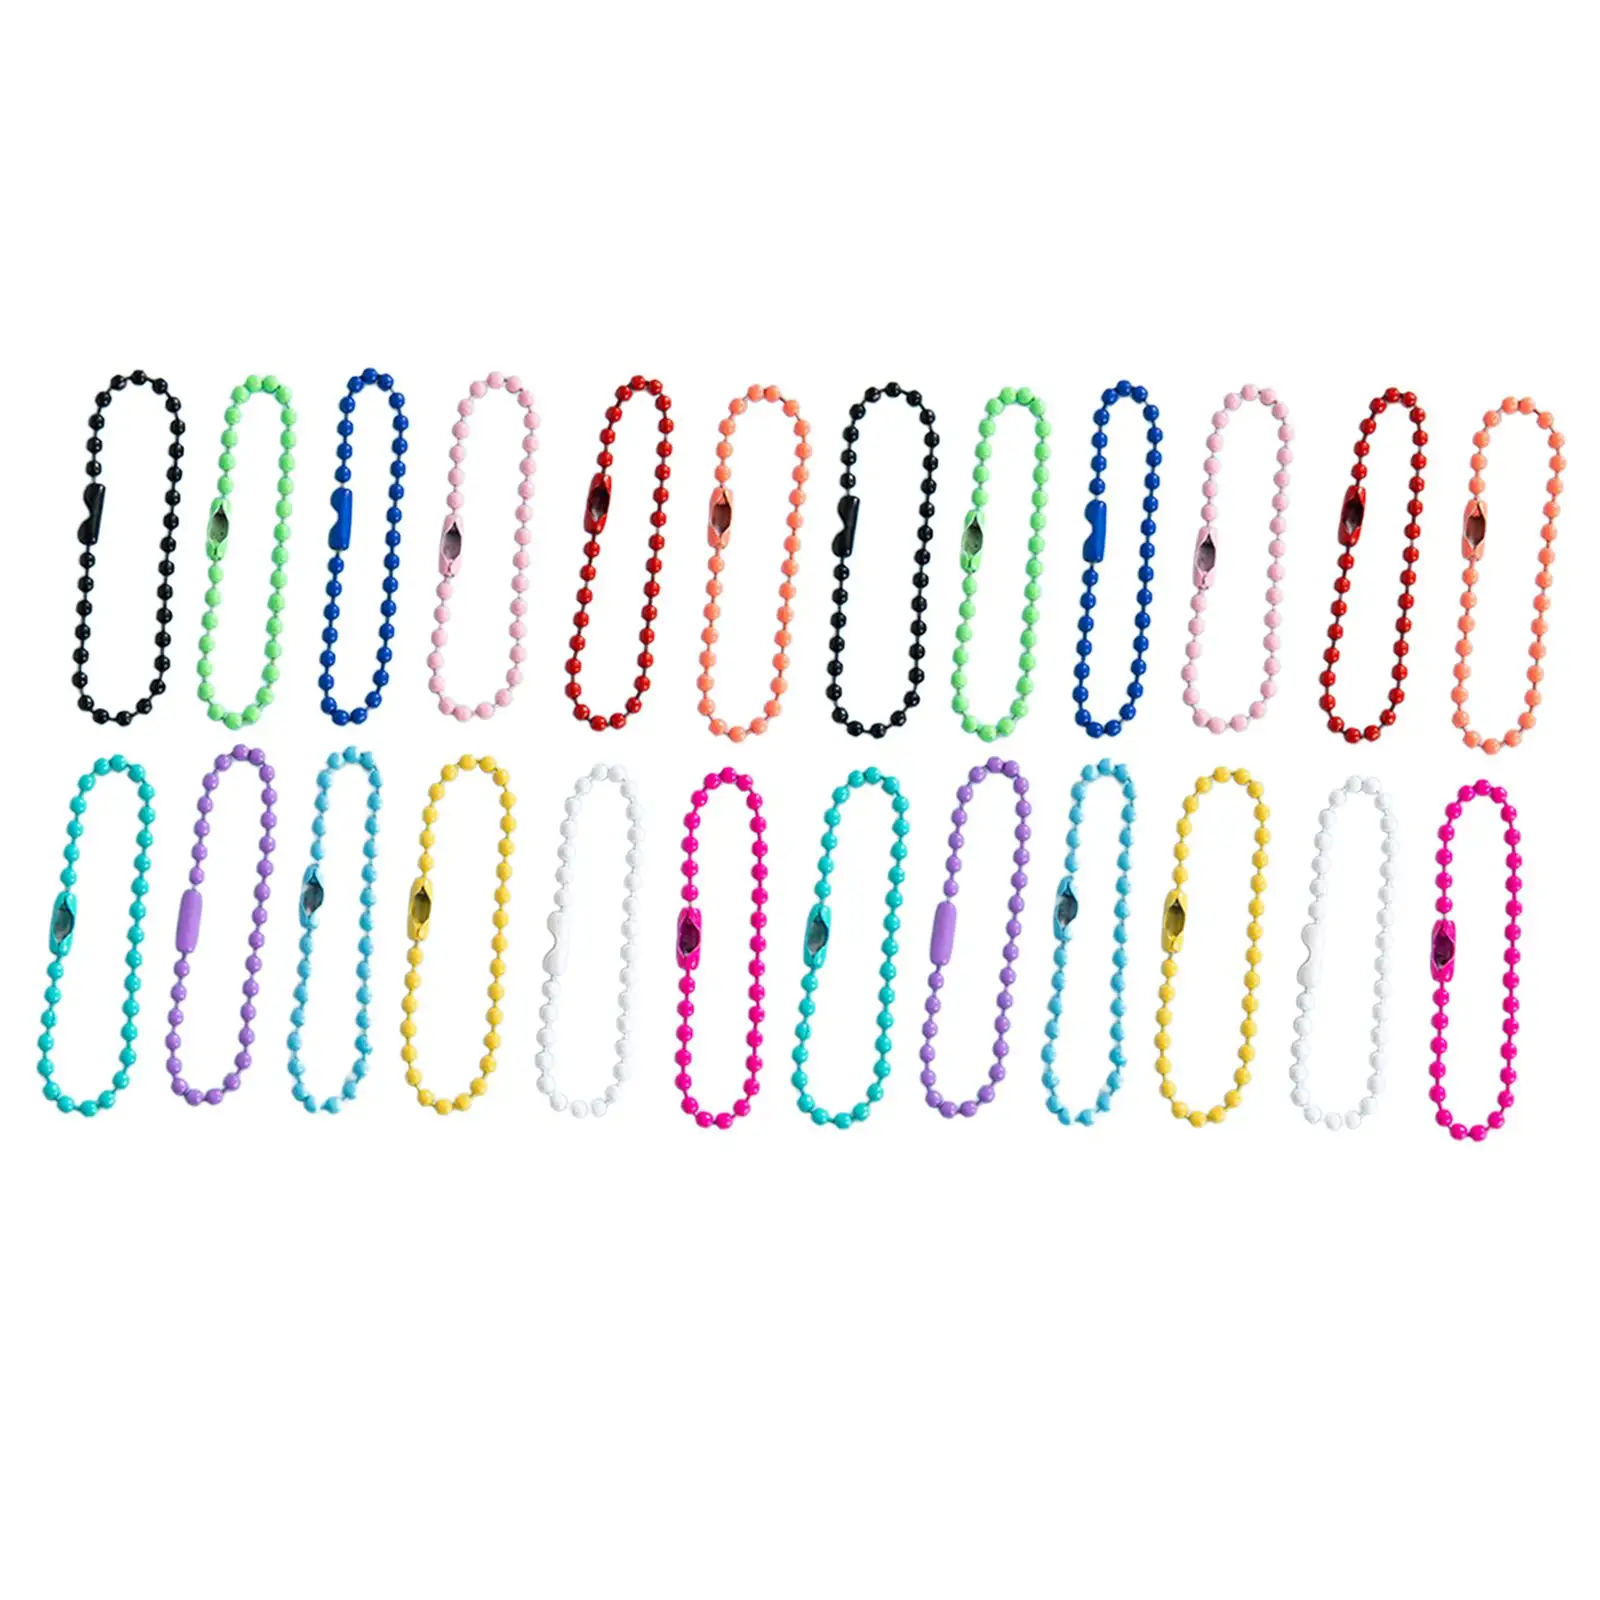 100 Pieces Colorful Ball Bead Chain Hanging DIY Crafts 2mm 10cm for Jewelry Making Projects Bracelet Necklace Accessories